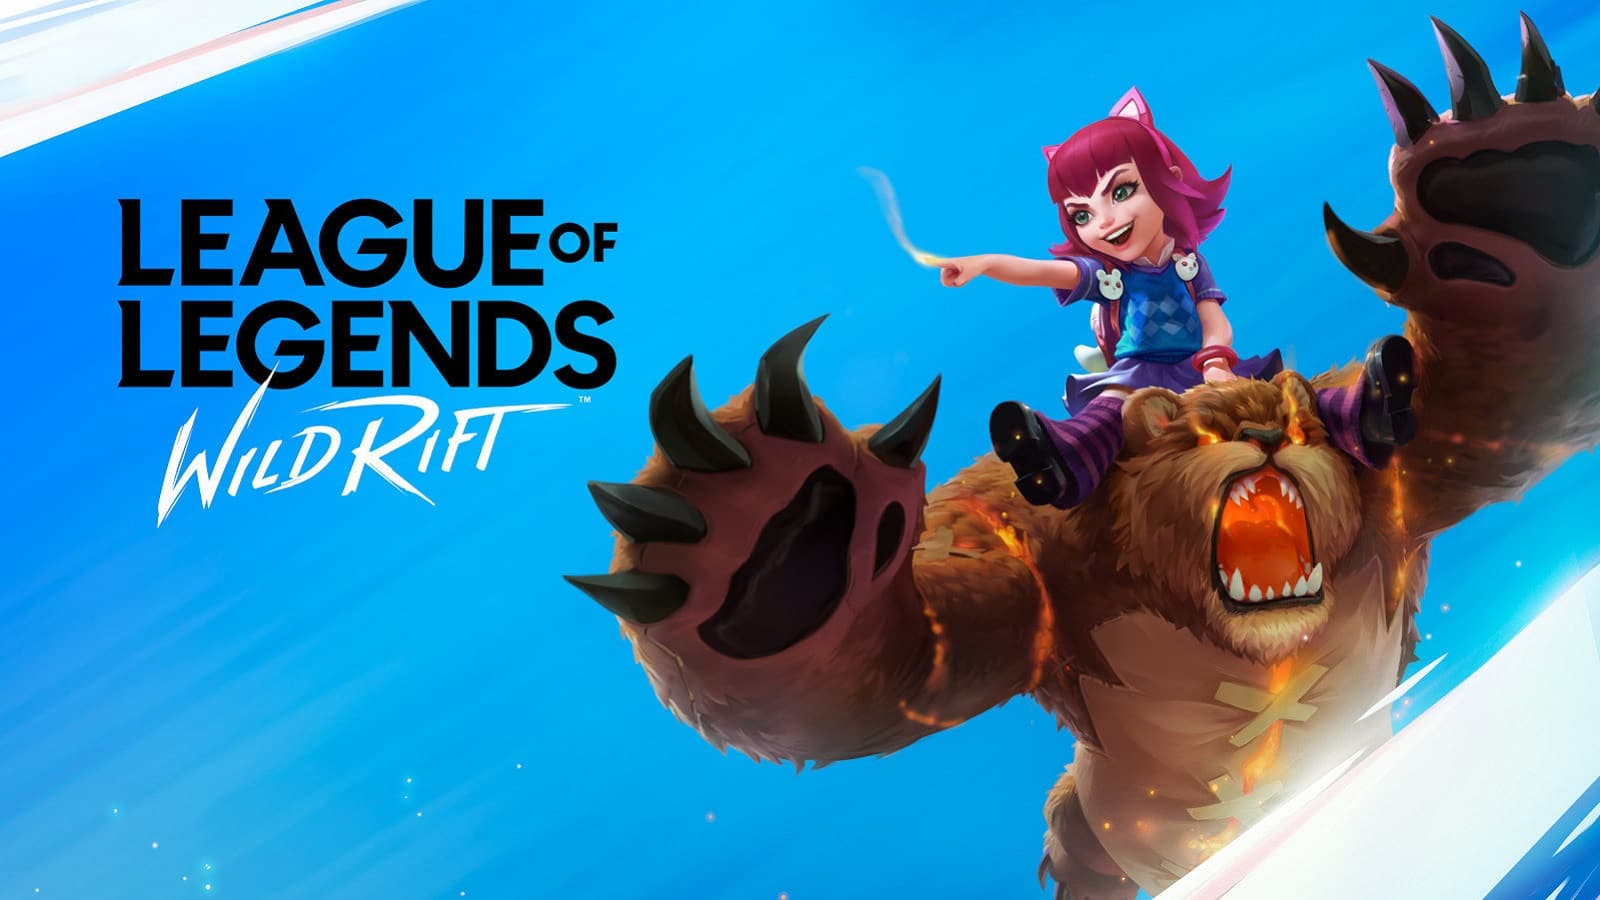 League of Legends: Wild Rift We Know So Far (and What We Want)